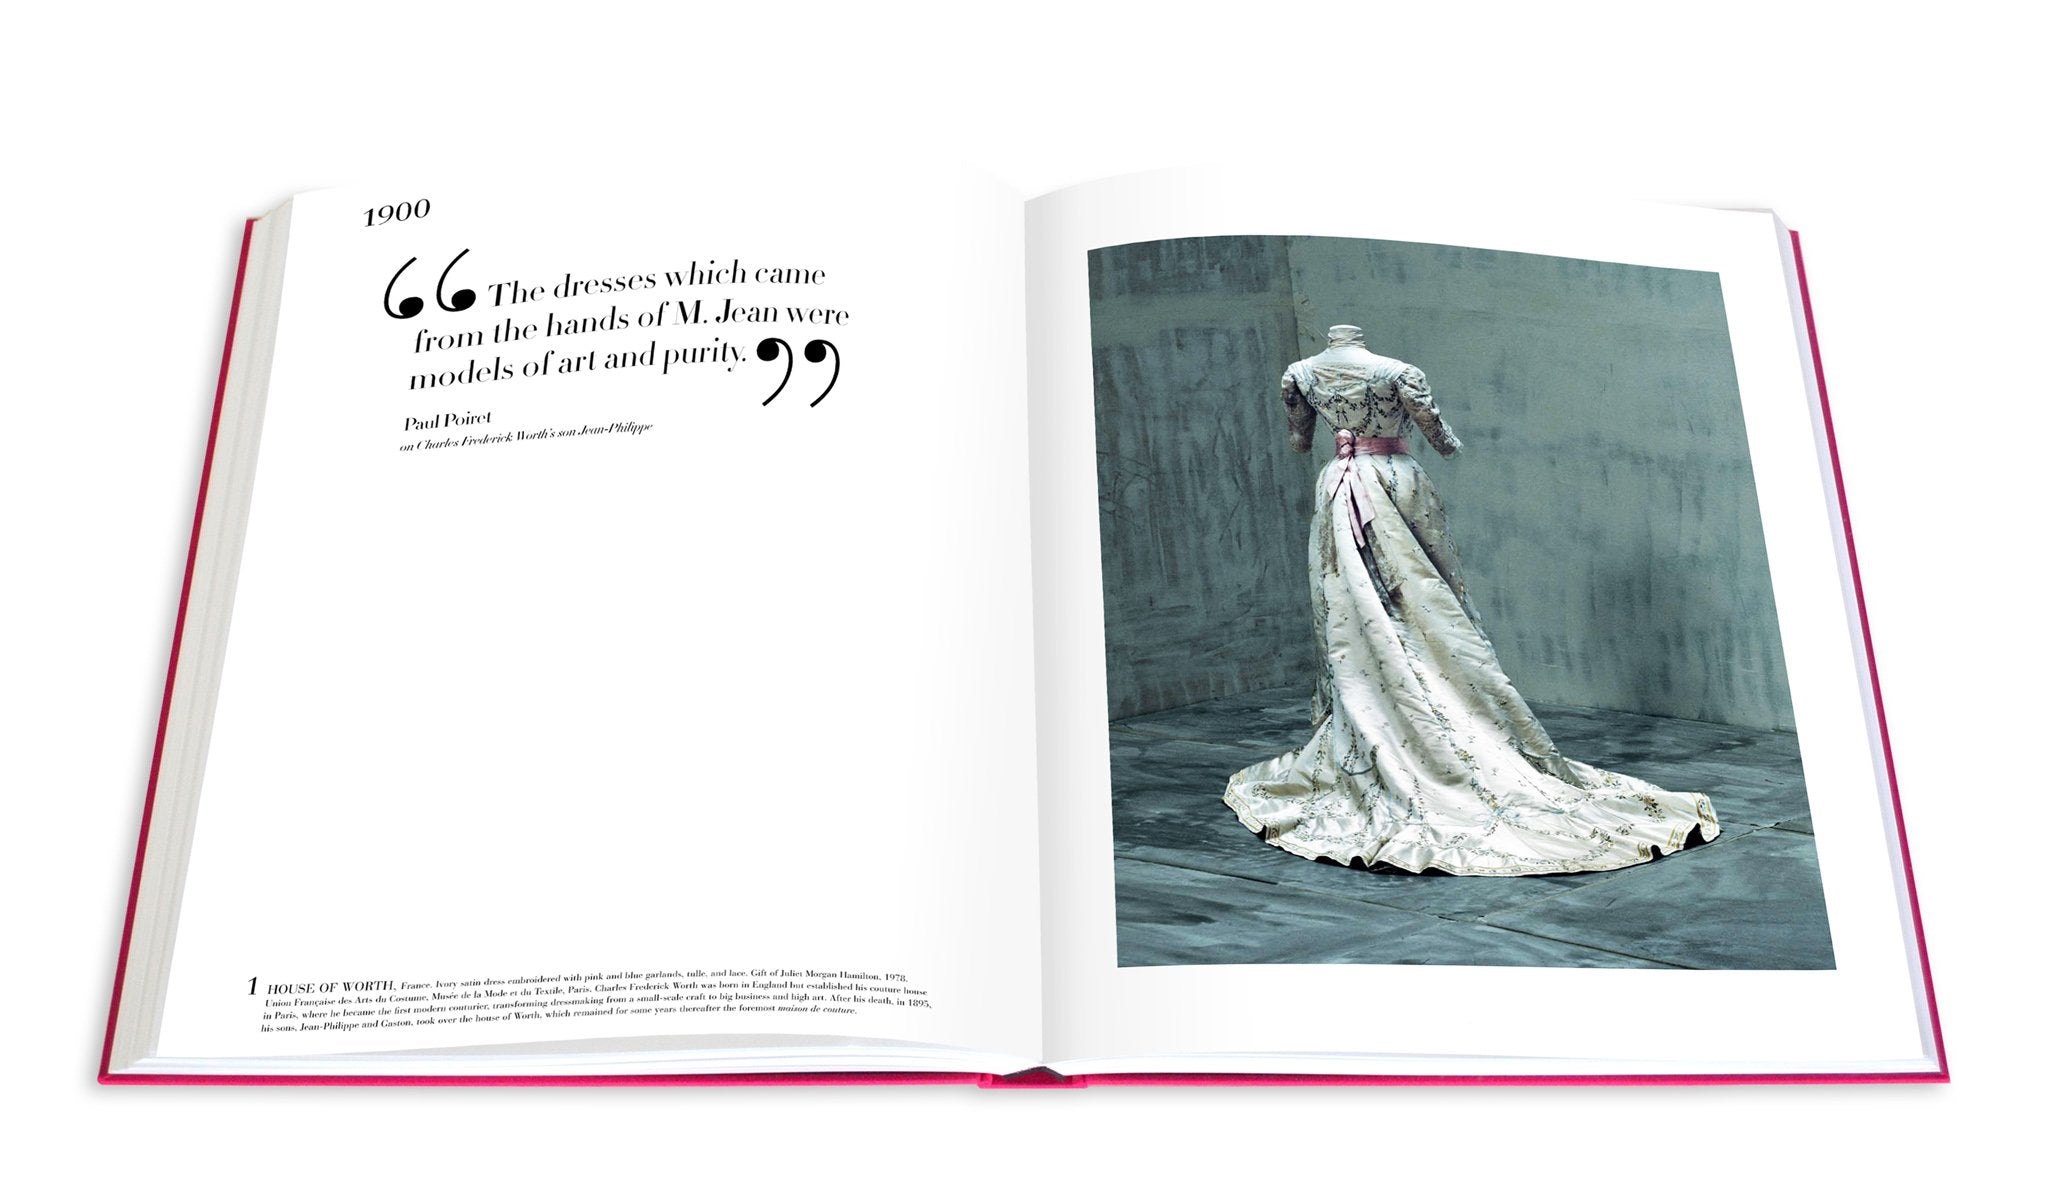 ASSOULINE The Impossible Collection of Fashion by Valerie Steele